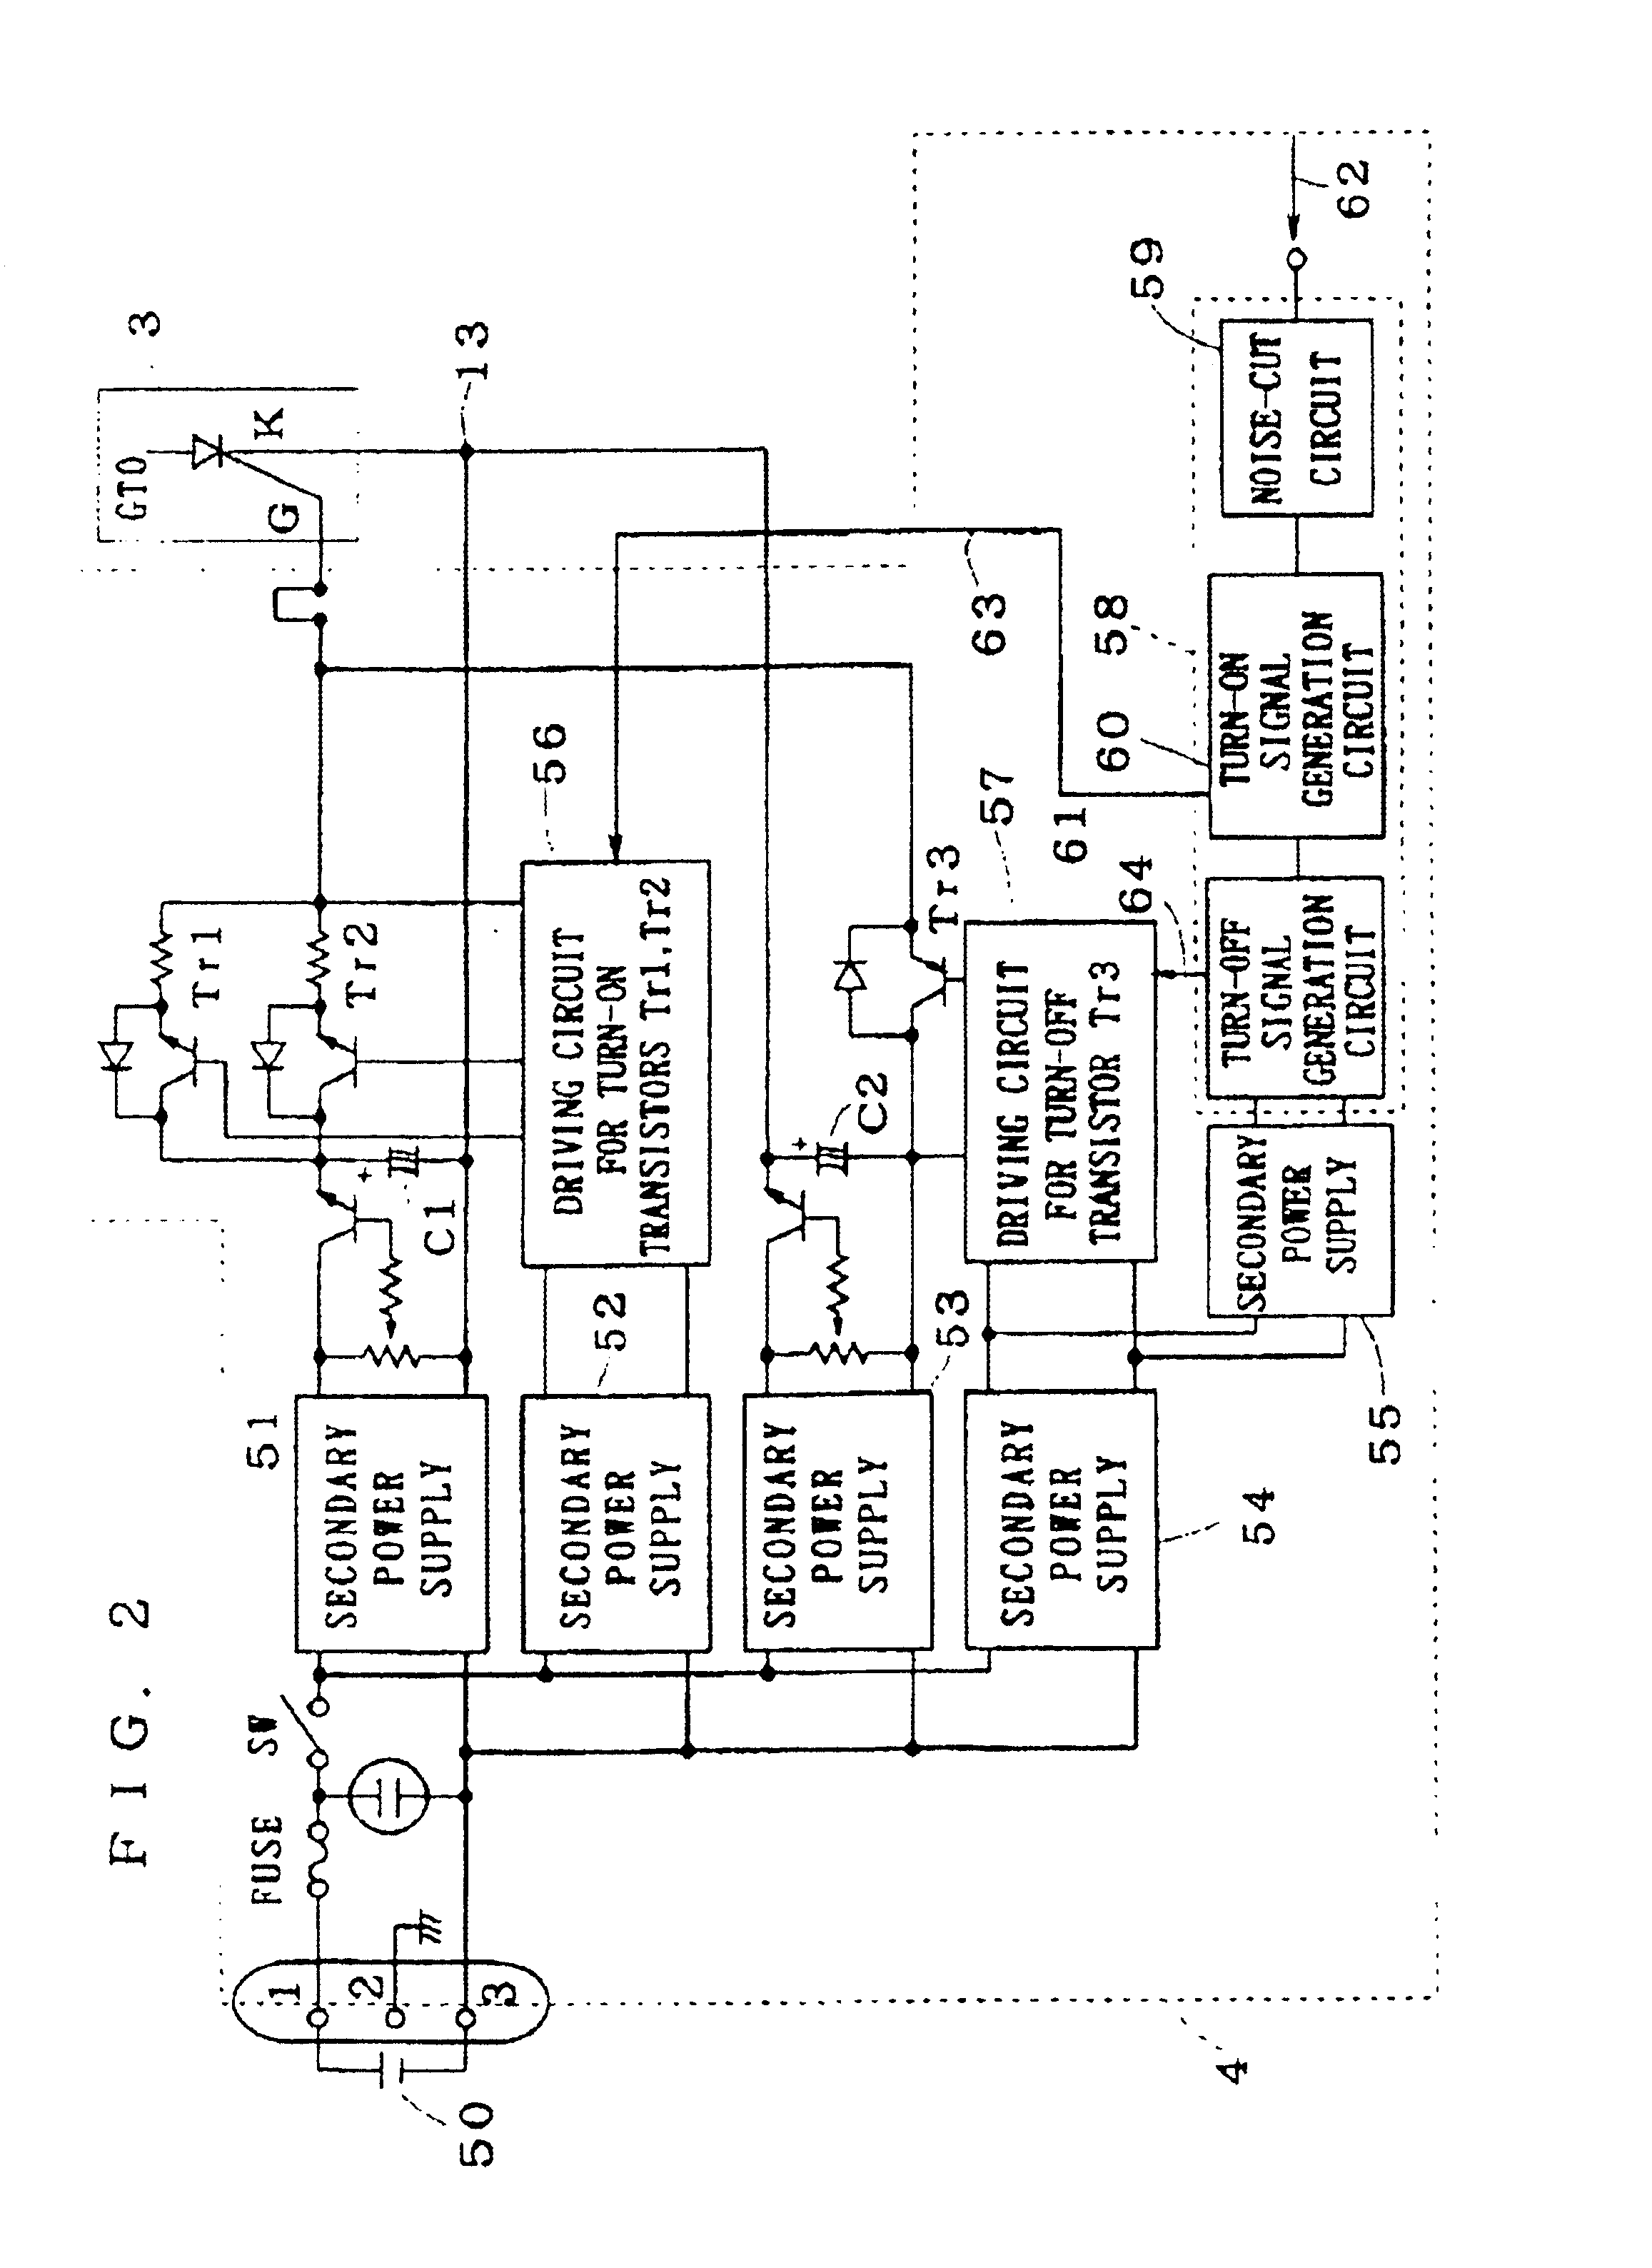 Semiconductor switching apparatus and method of controlling a semiconductor switching element